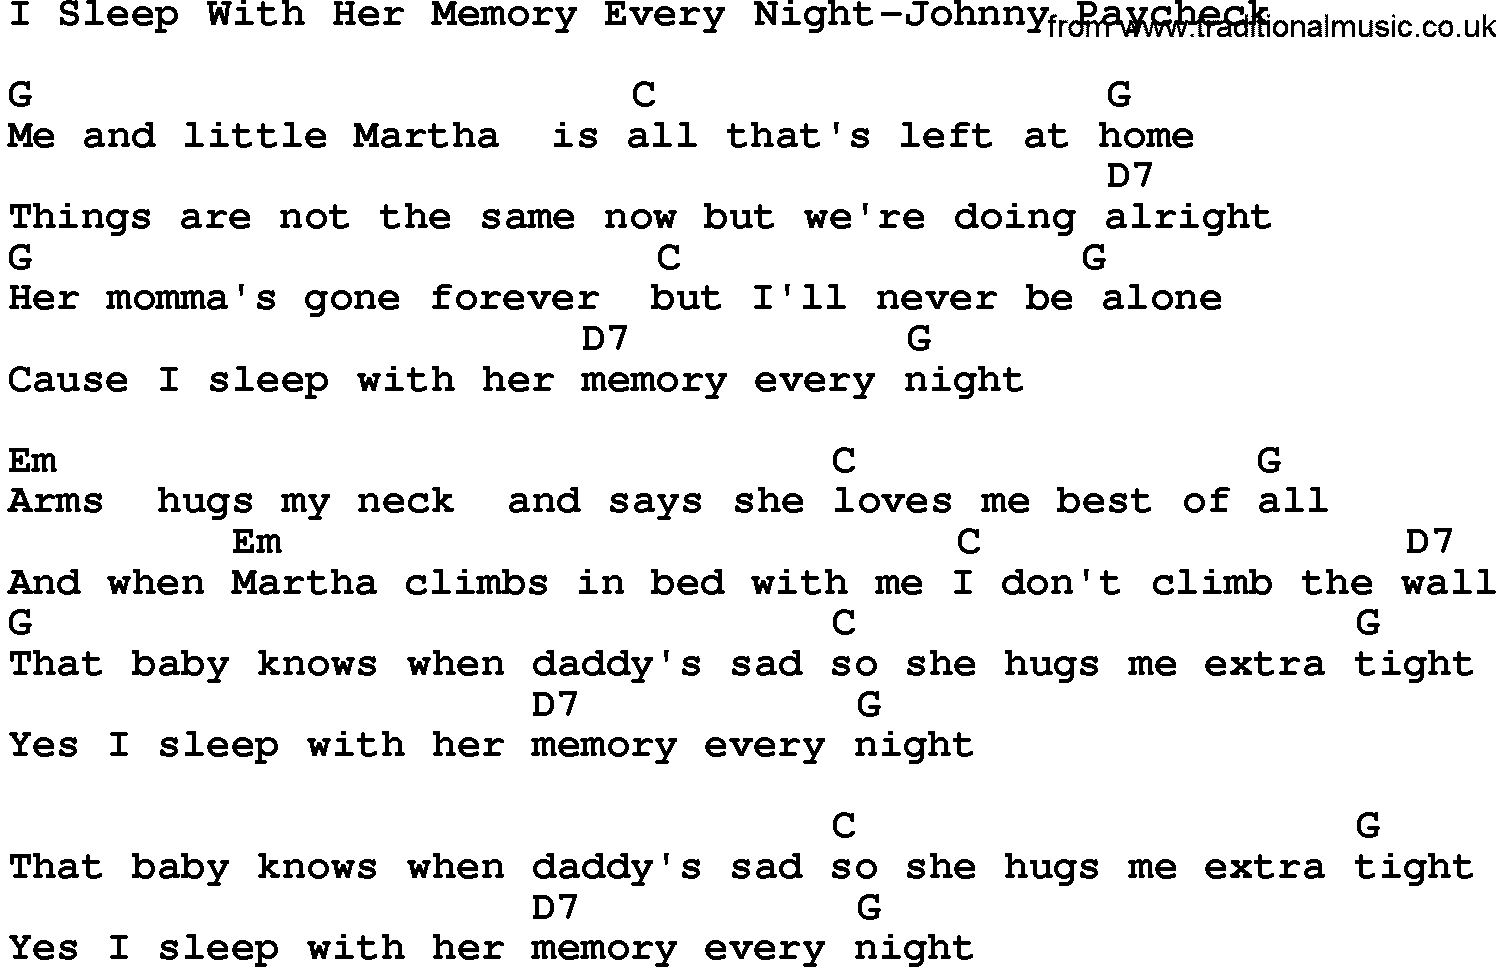 Country music song: I Sleep With Her Memory Every Night-Johnny Paycheck lyrics and chords